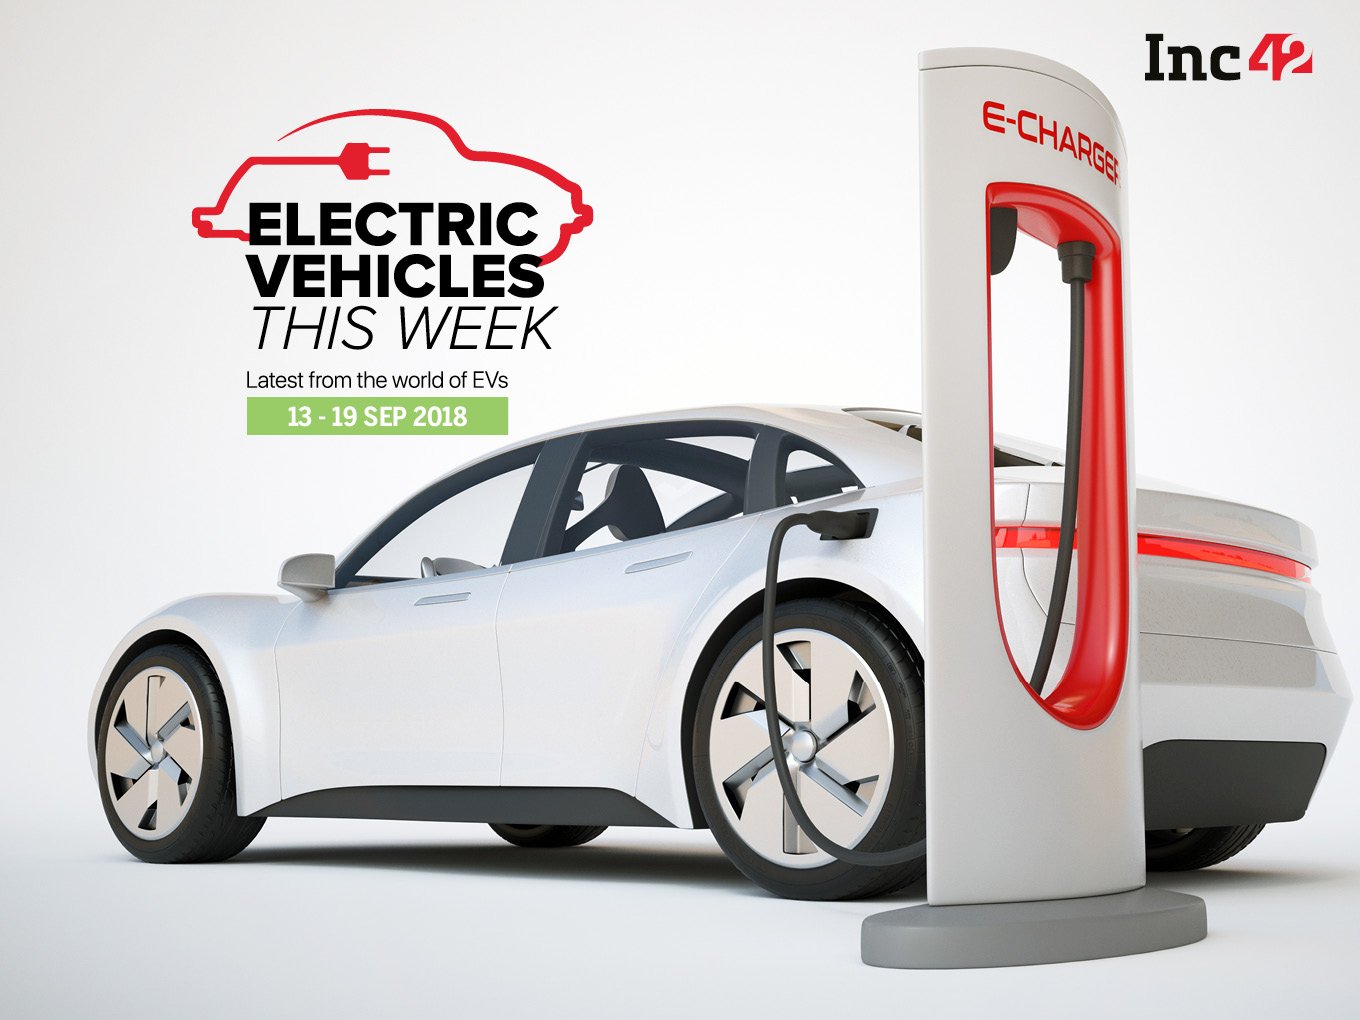 Electric Vehicles This Week: Jharkhand Marks Beginning Of Emobility, Maharashtra To Get New EV Charging Stations, And More